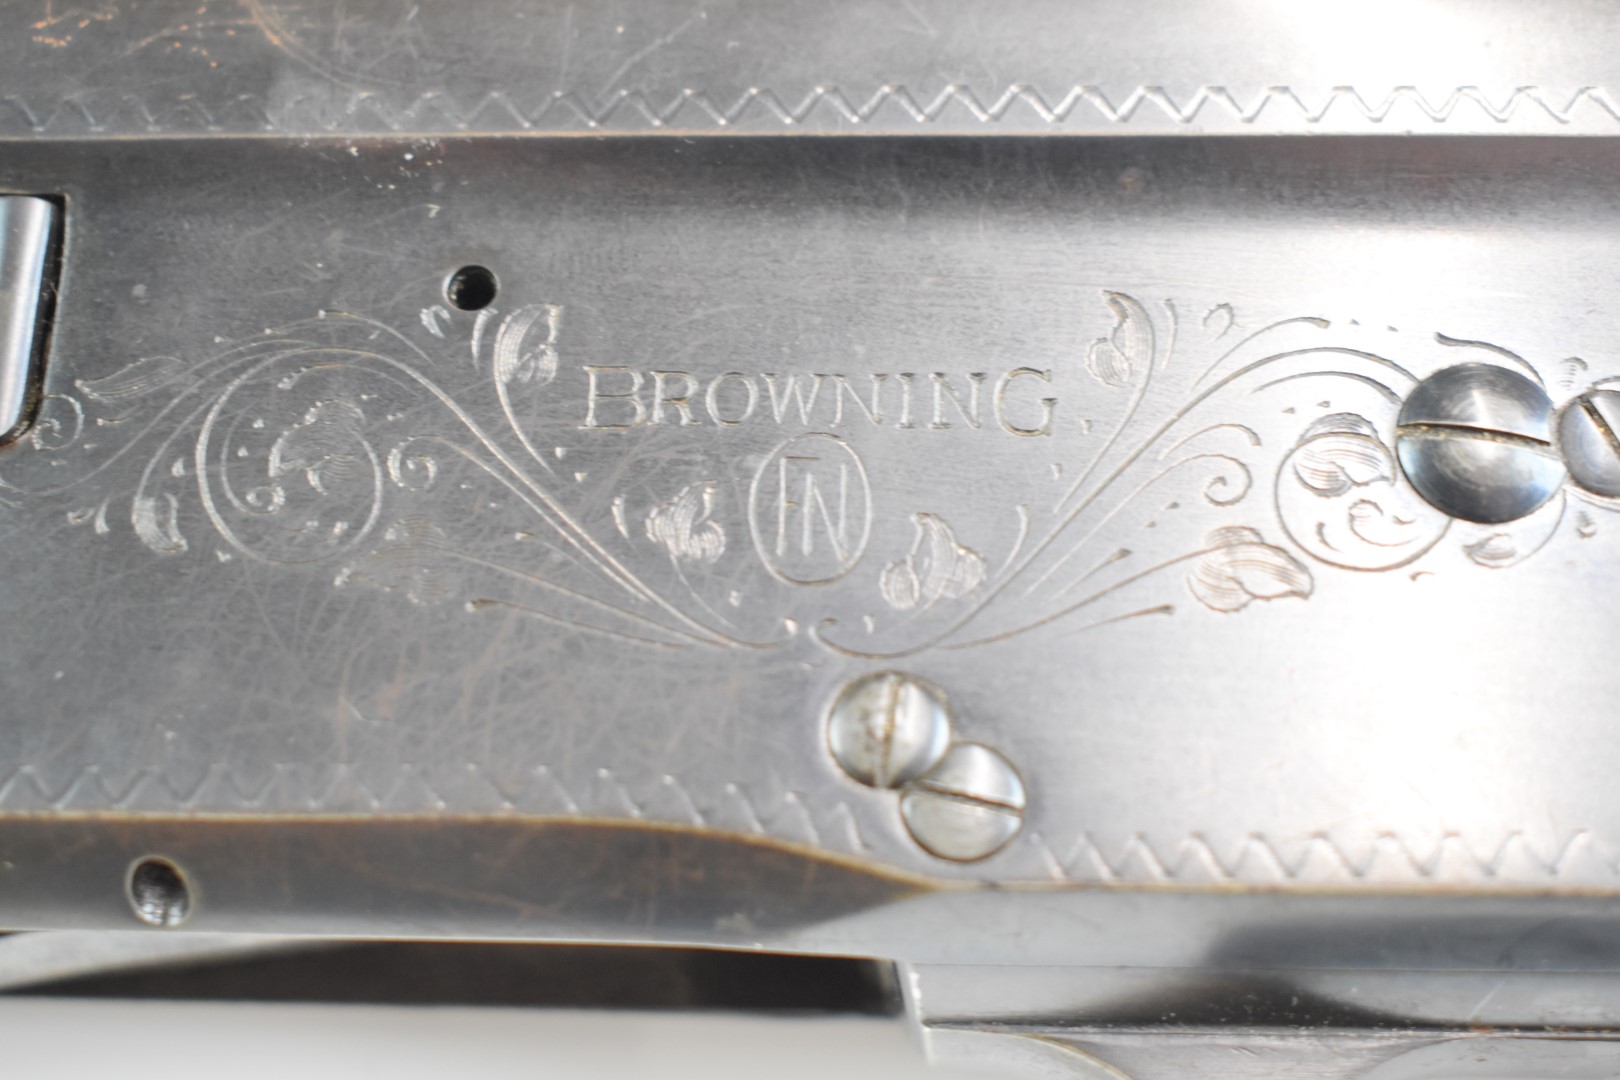 Browning 12 bore 3-shot semi-automatic shotgun with named and engraved locks, semi-pistol grip and - Image 22 of 22